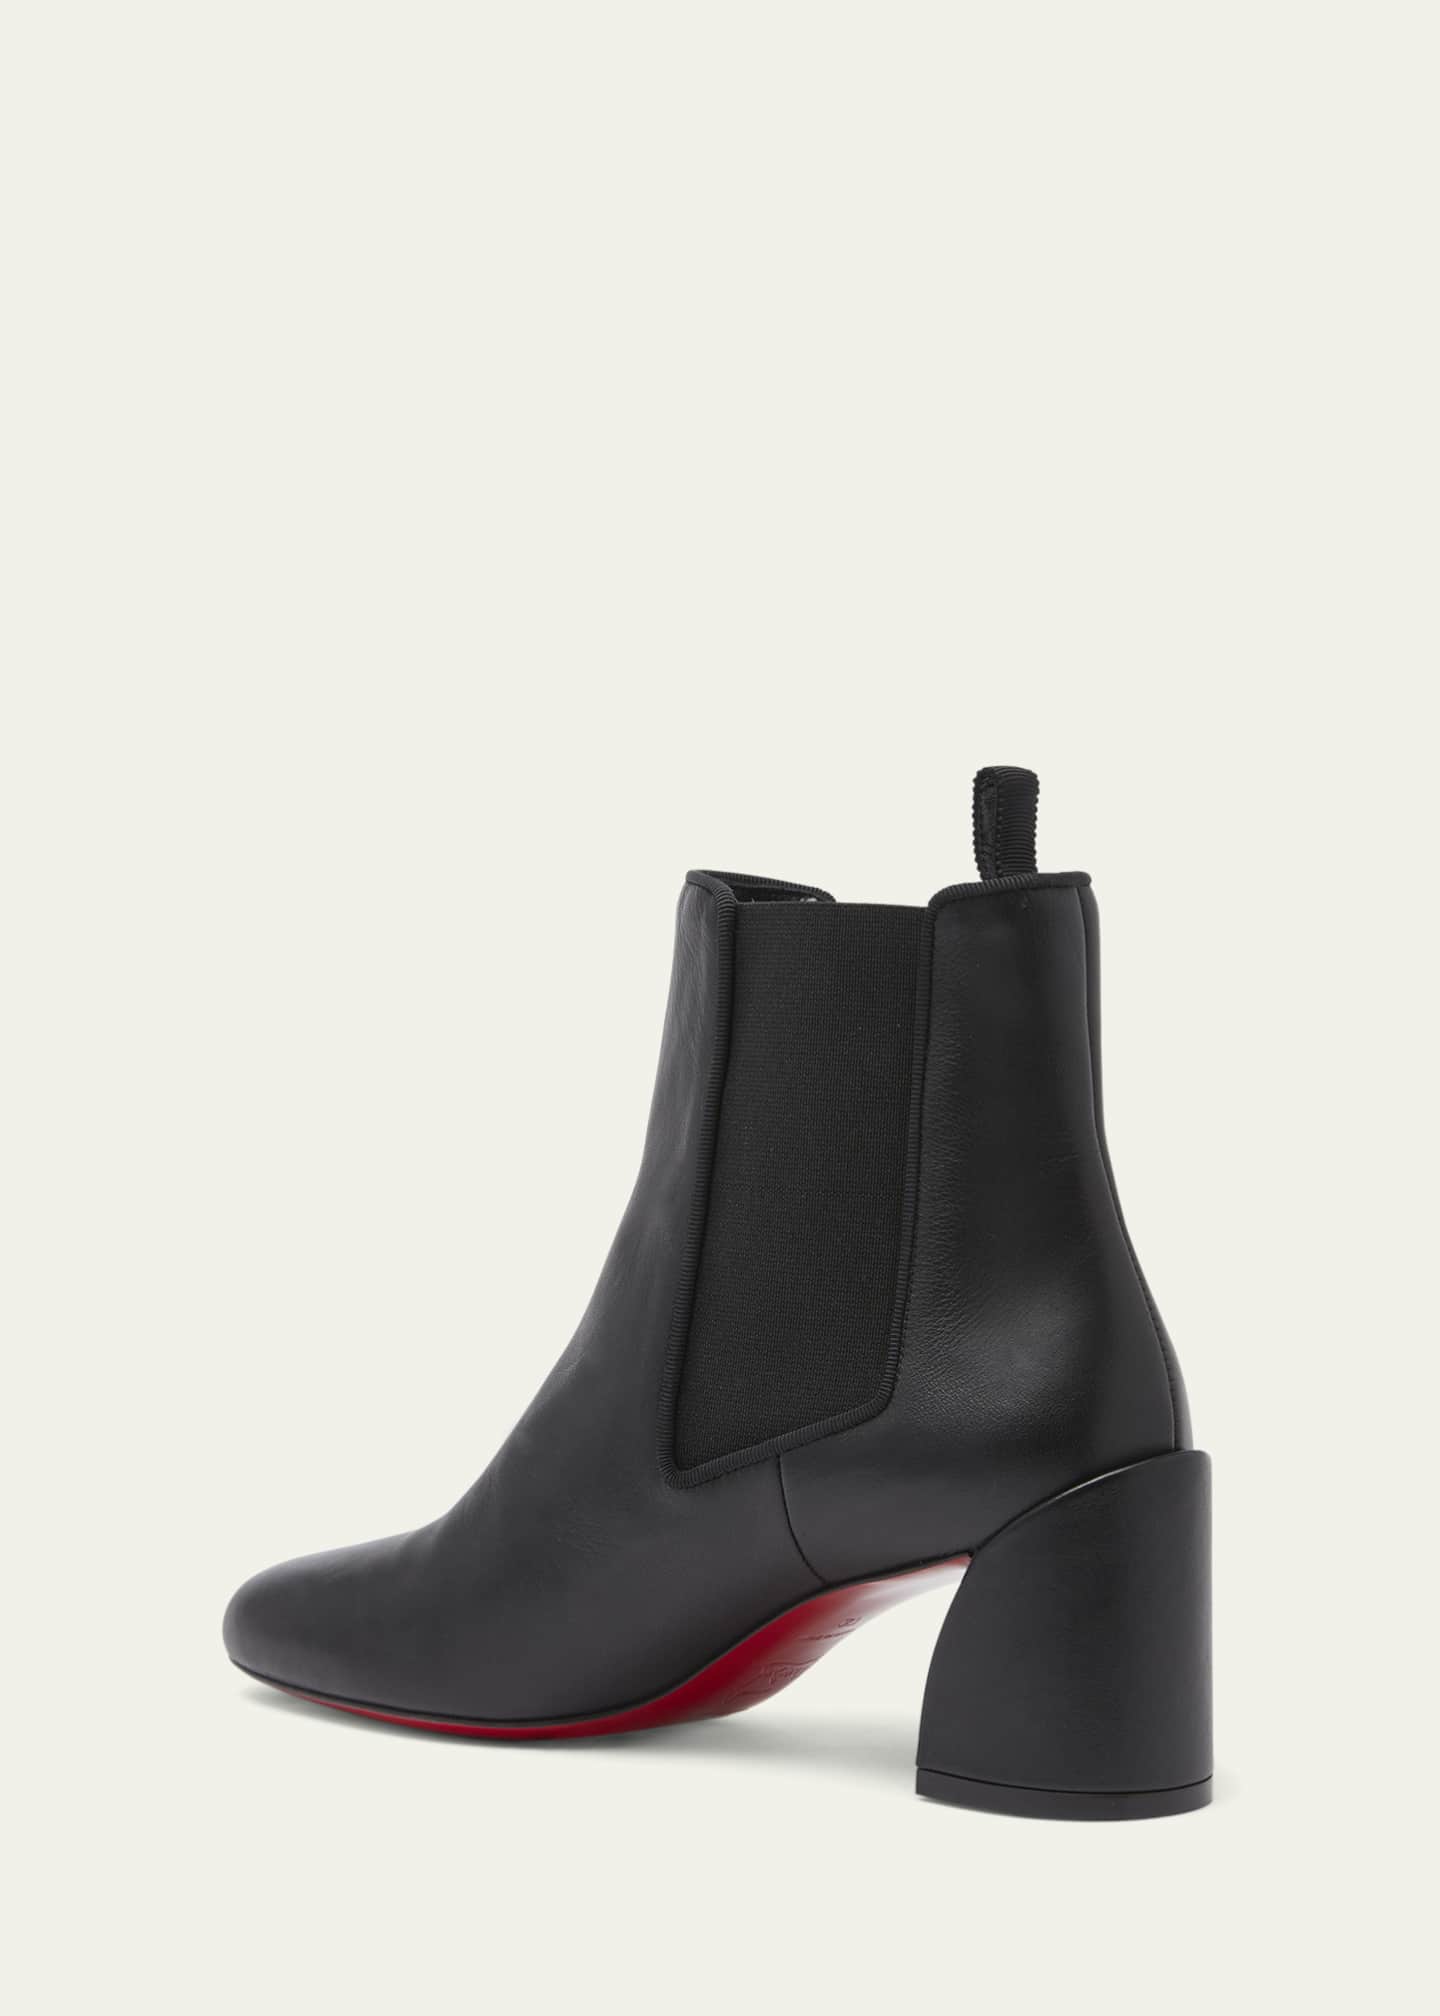 Christian Louboutin Turelastic Red Sole Calf Leather Boots - Bergdorf ...